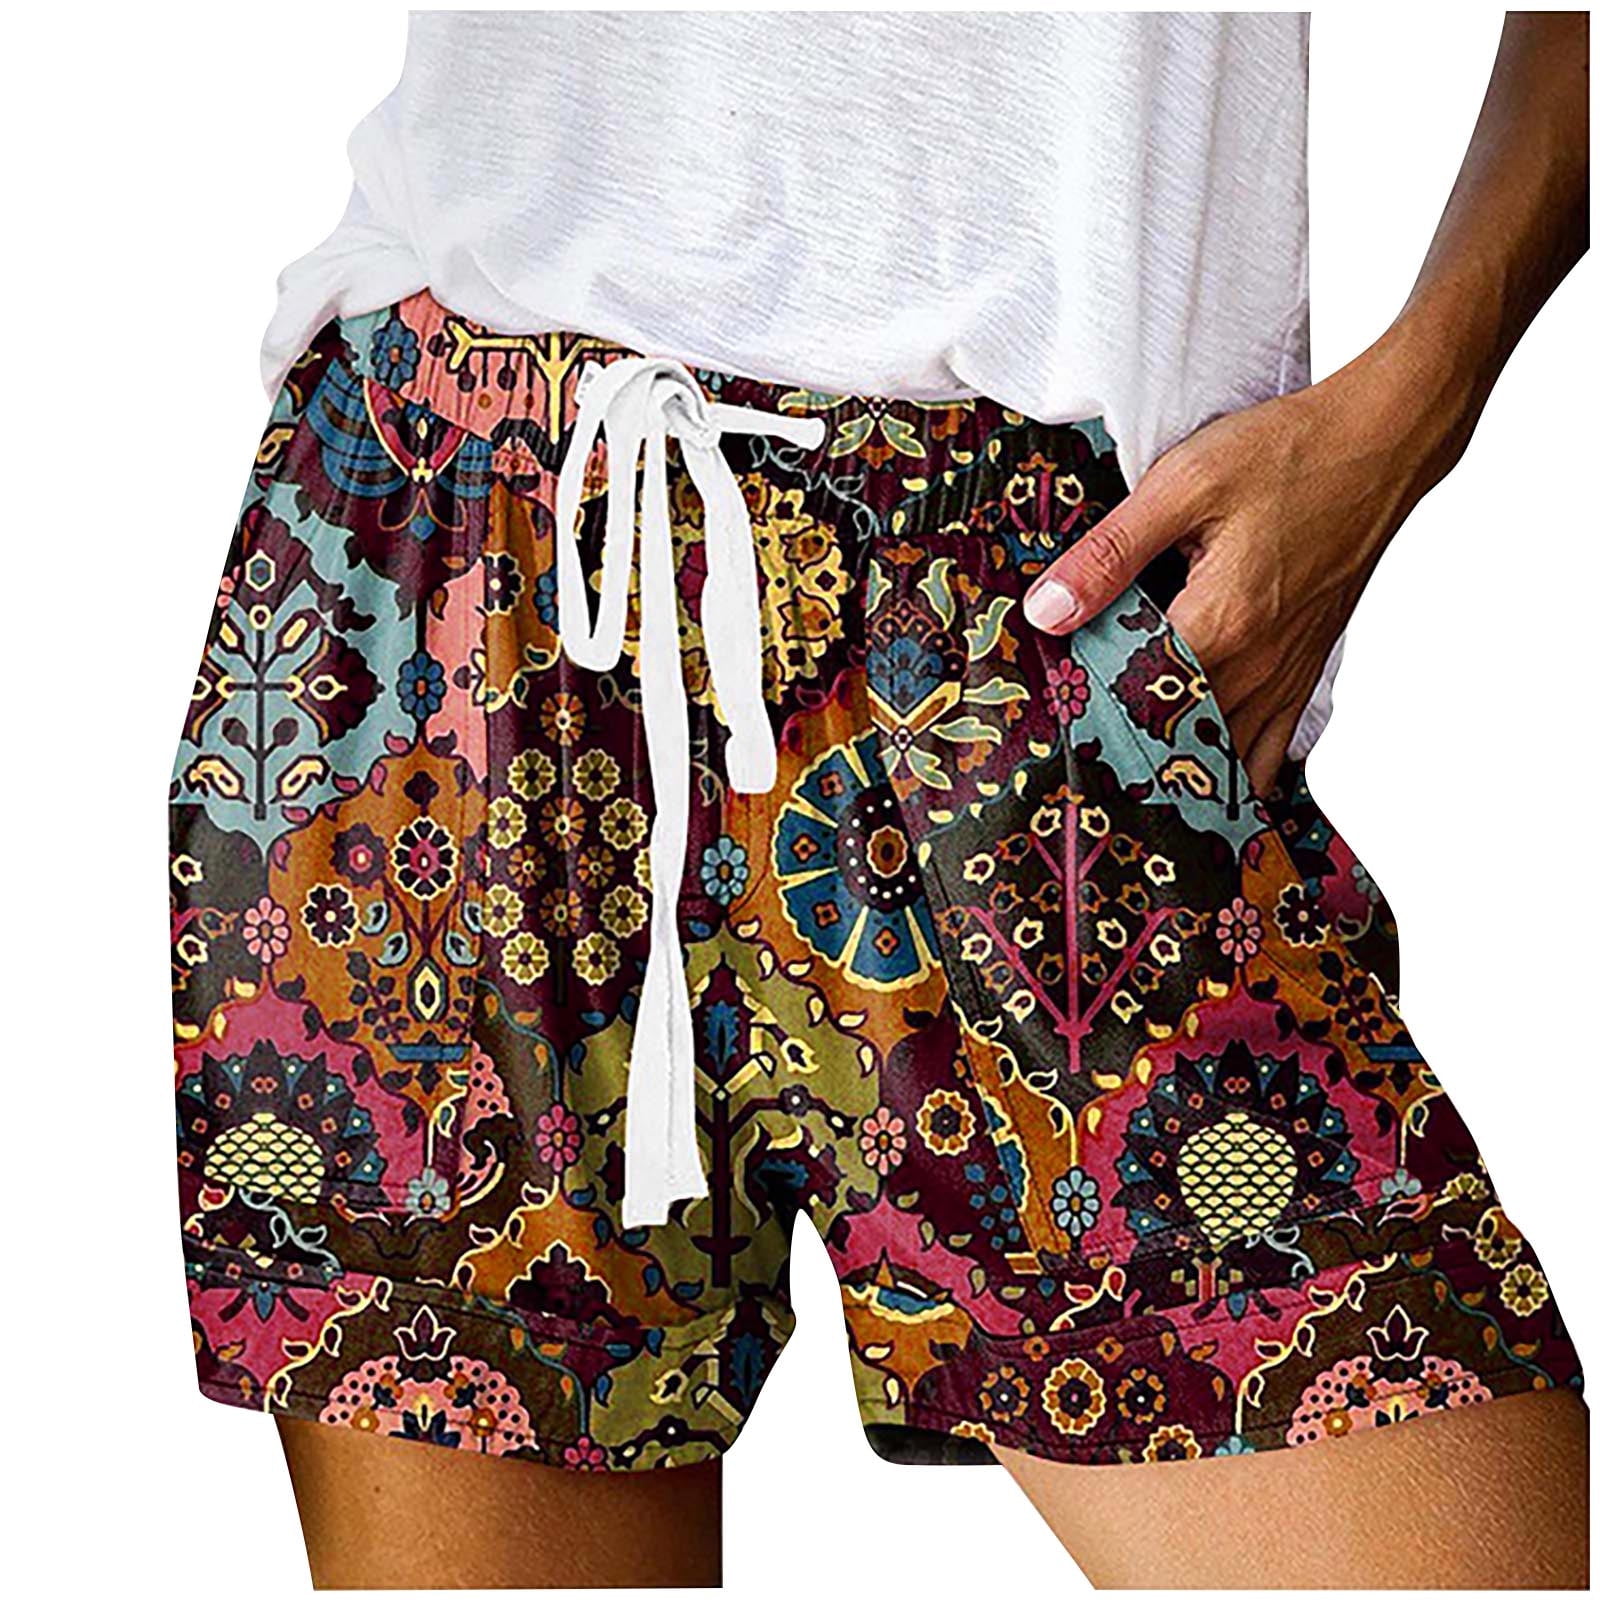 Black and Friday Deals 2023 Womens Clothes Clearance GaThRRgYP Shorts for  Women Plus Size,Women's Summer New High Waist Lace Up Loose Digital  Printing Casual Shorts Hot Pants 